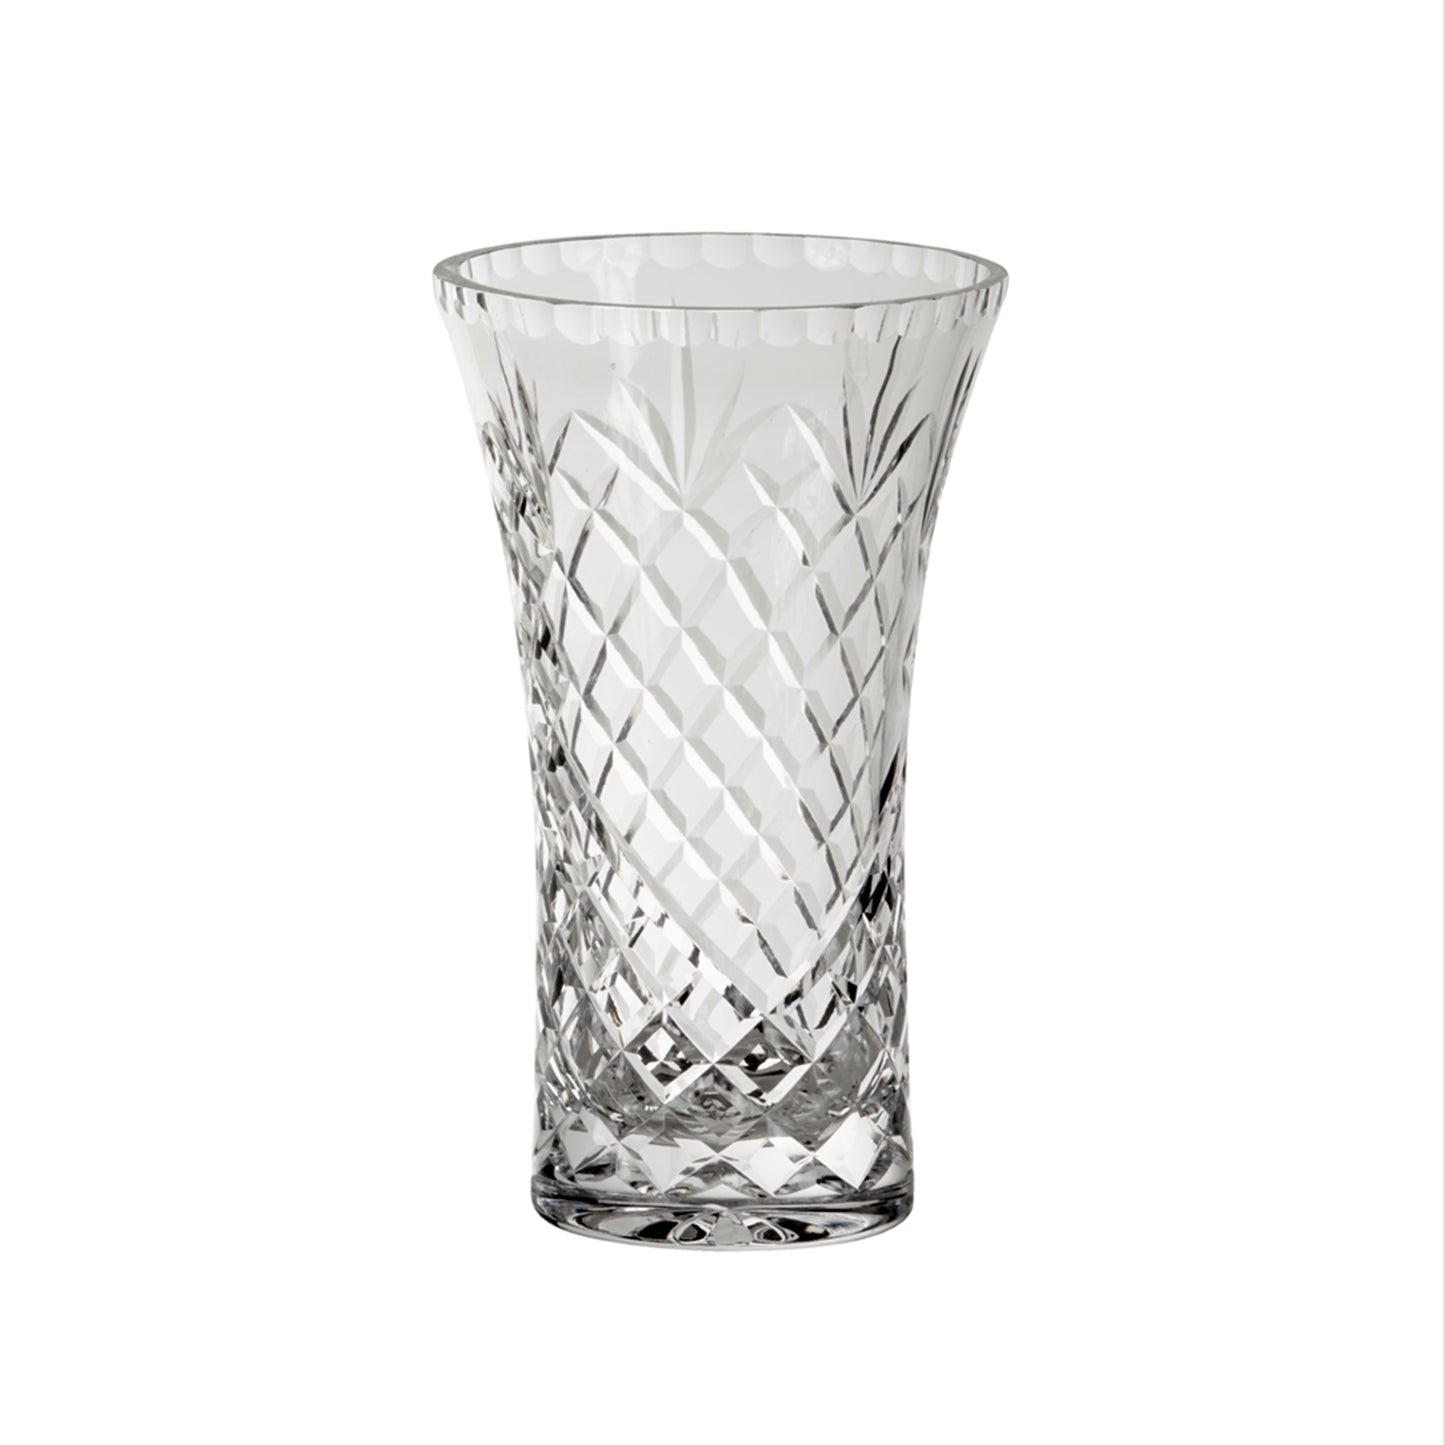 Crystal Flared Vase With Medallion Ii Pattern, 7" X 4.25"